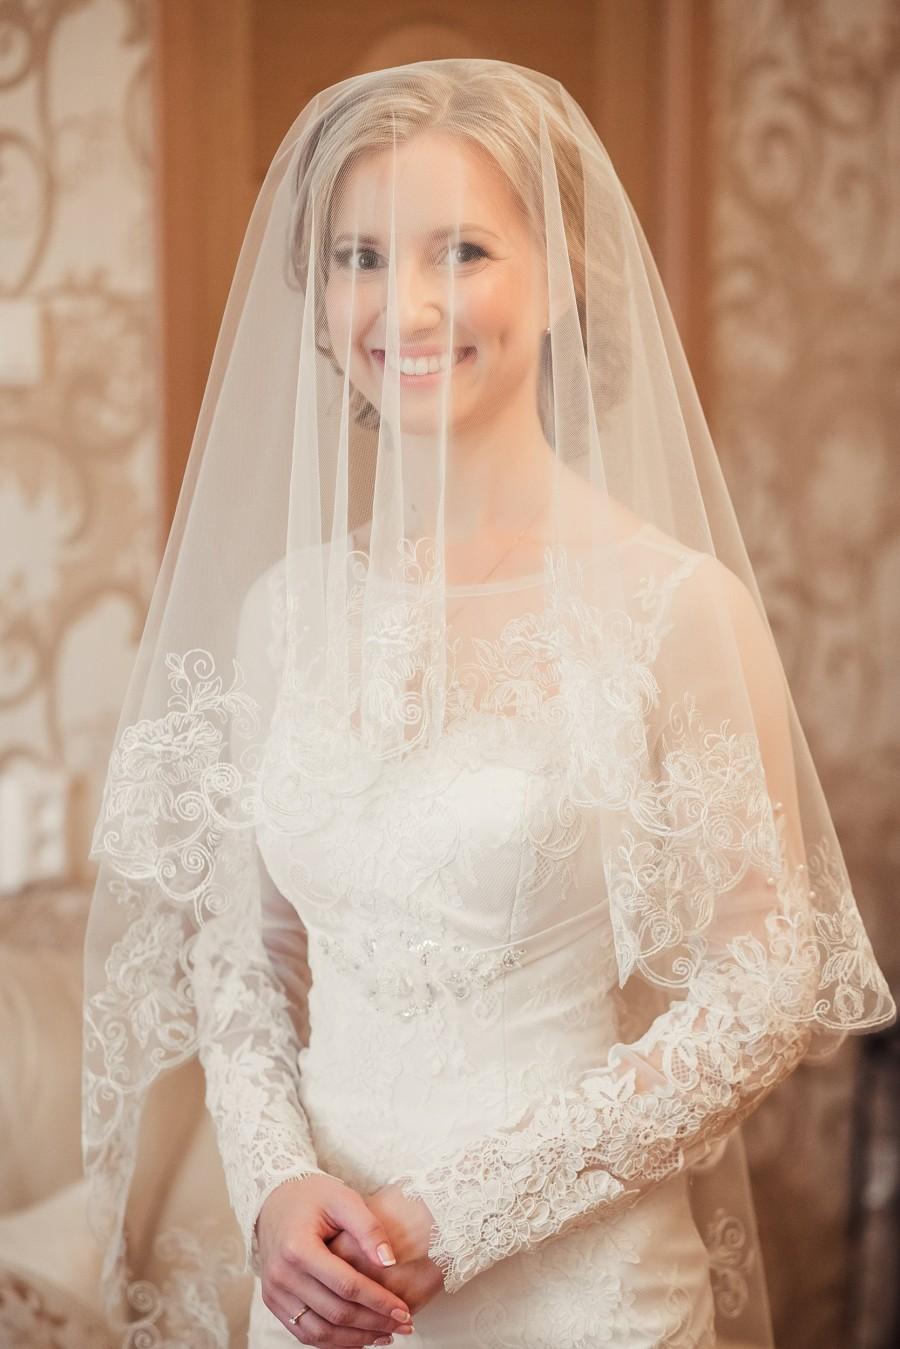 Wedding - Wedding veil with flowers, 2 tier veil with embroidery, Lace veil with comb, Long veil, Fingertip veil, Chapel veil, Cathedral veil